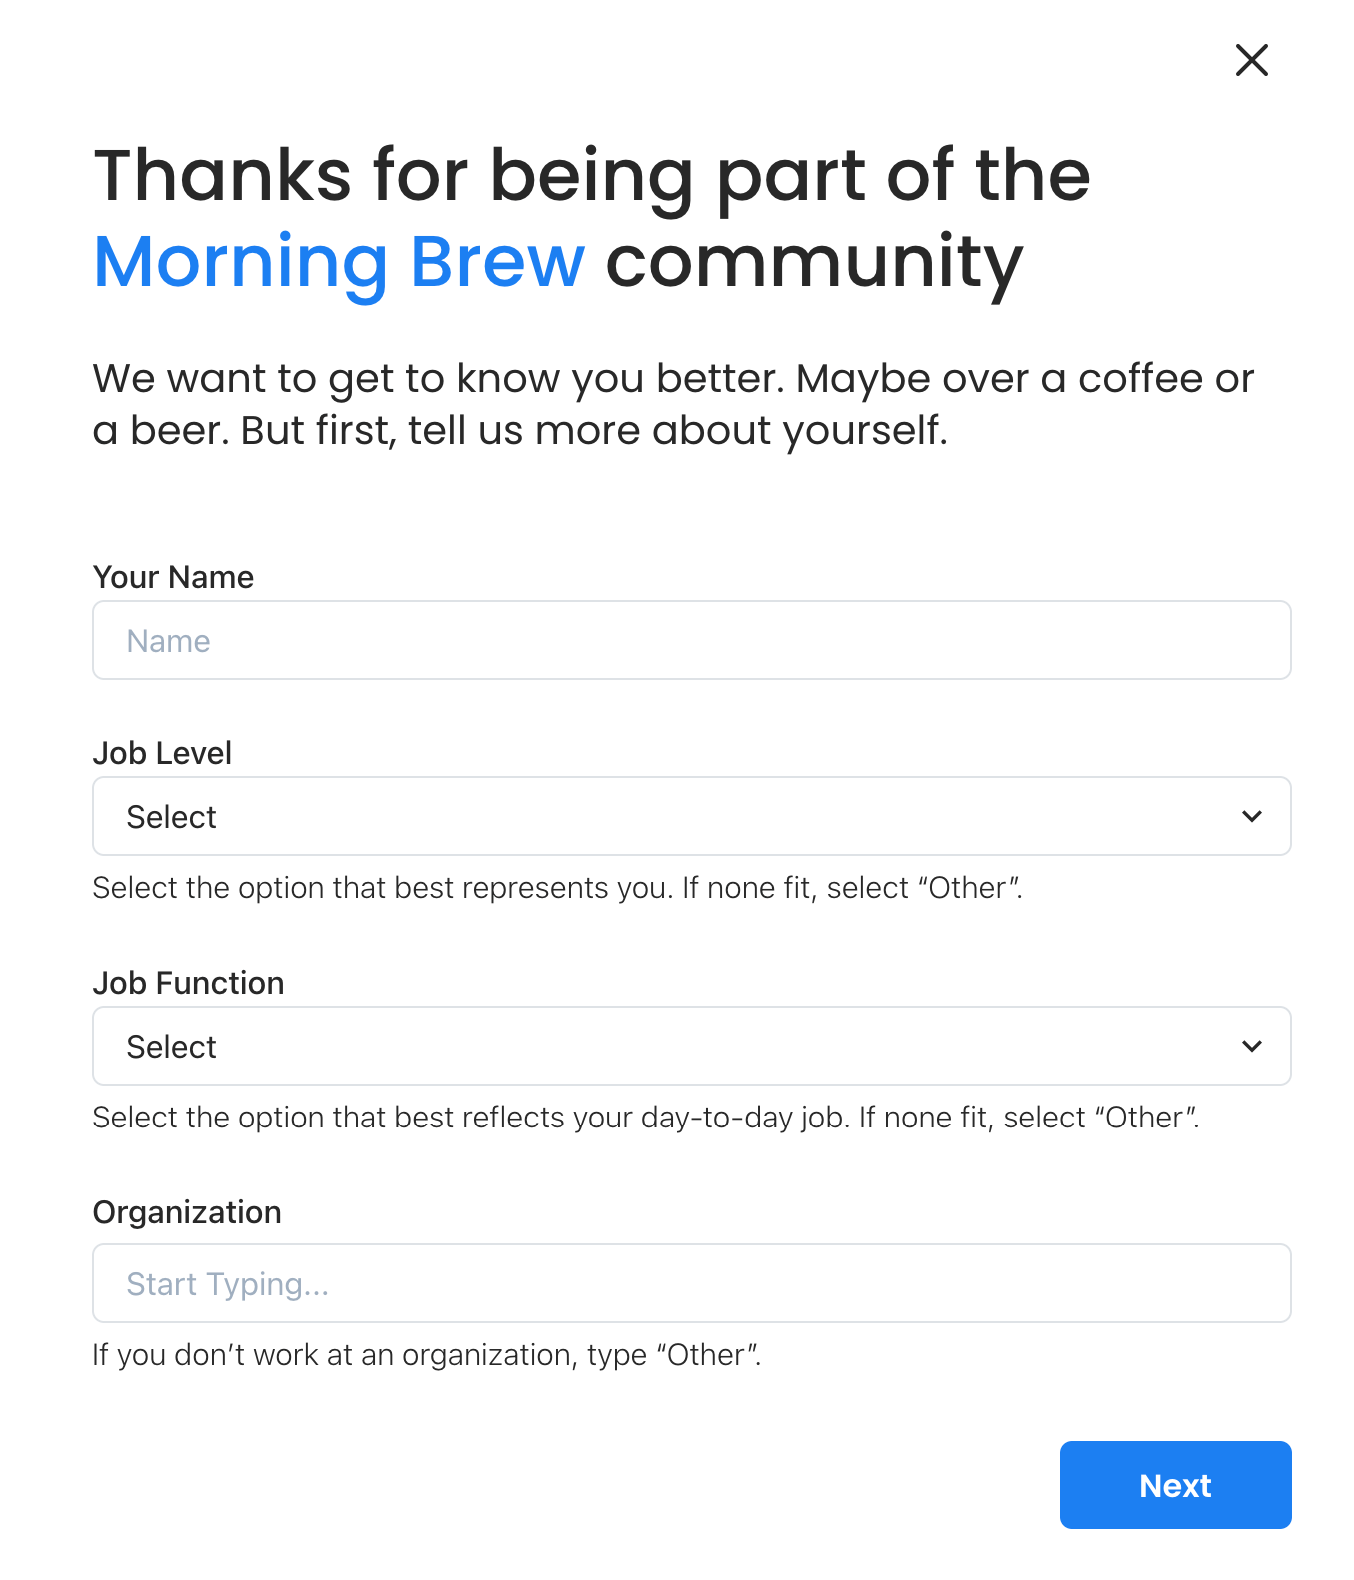 Personal information survey from Morning Brew